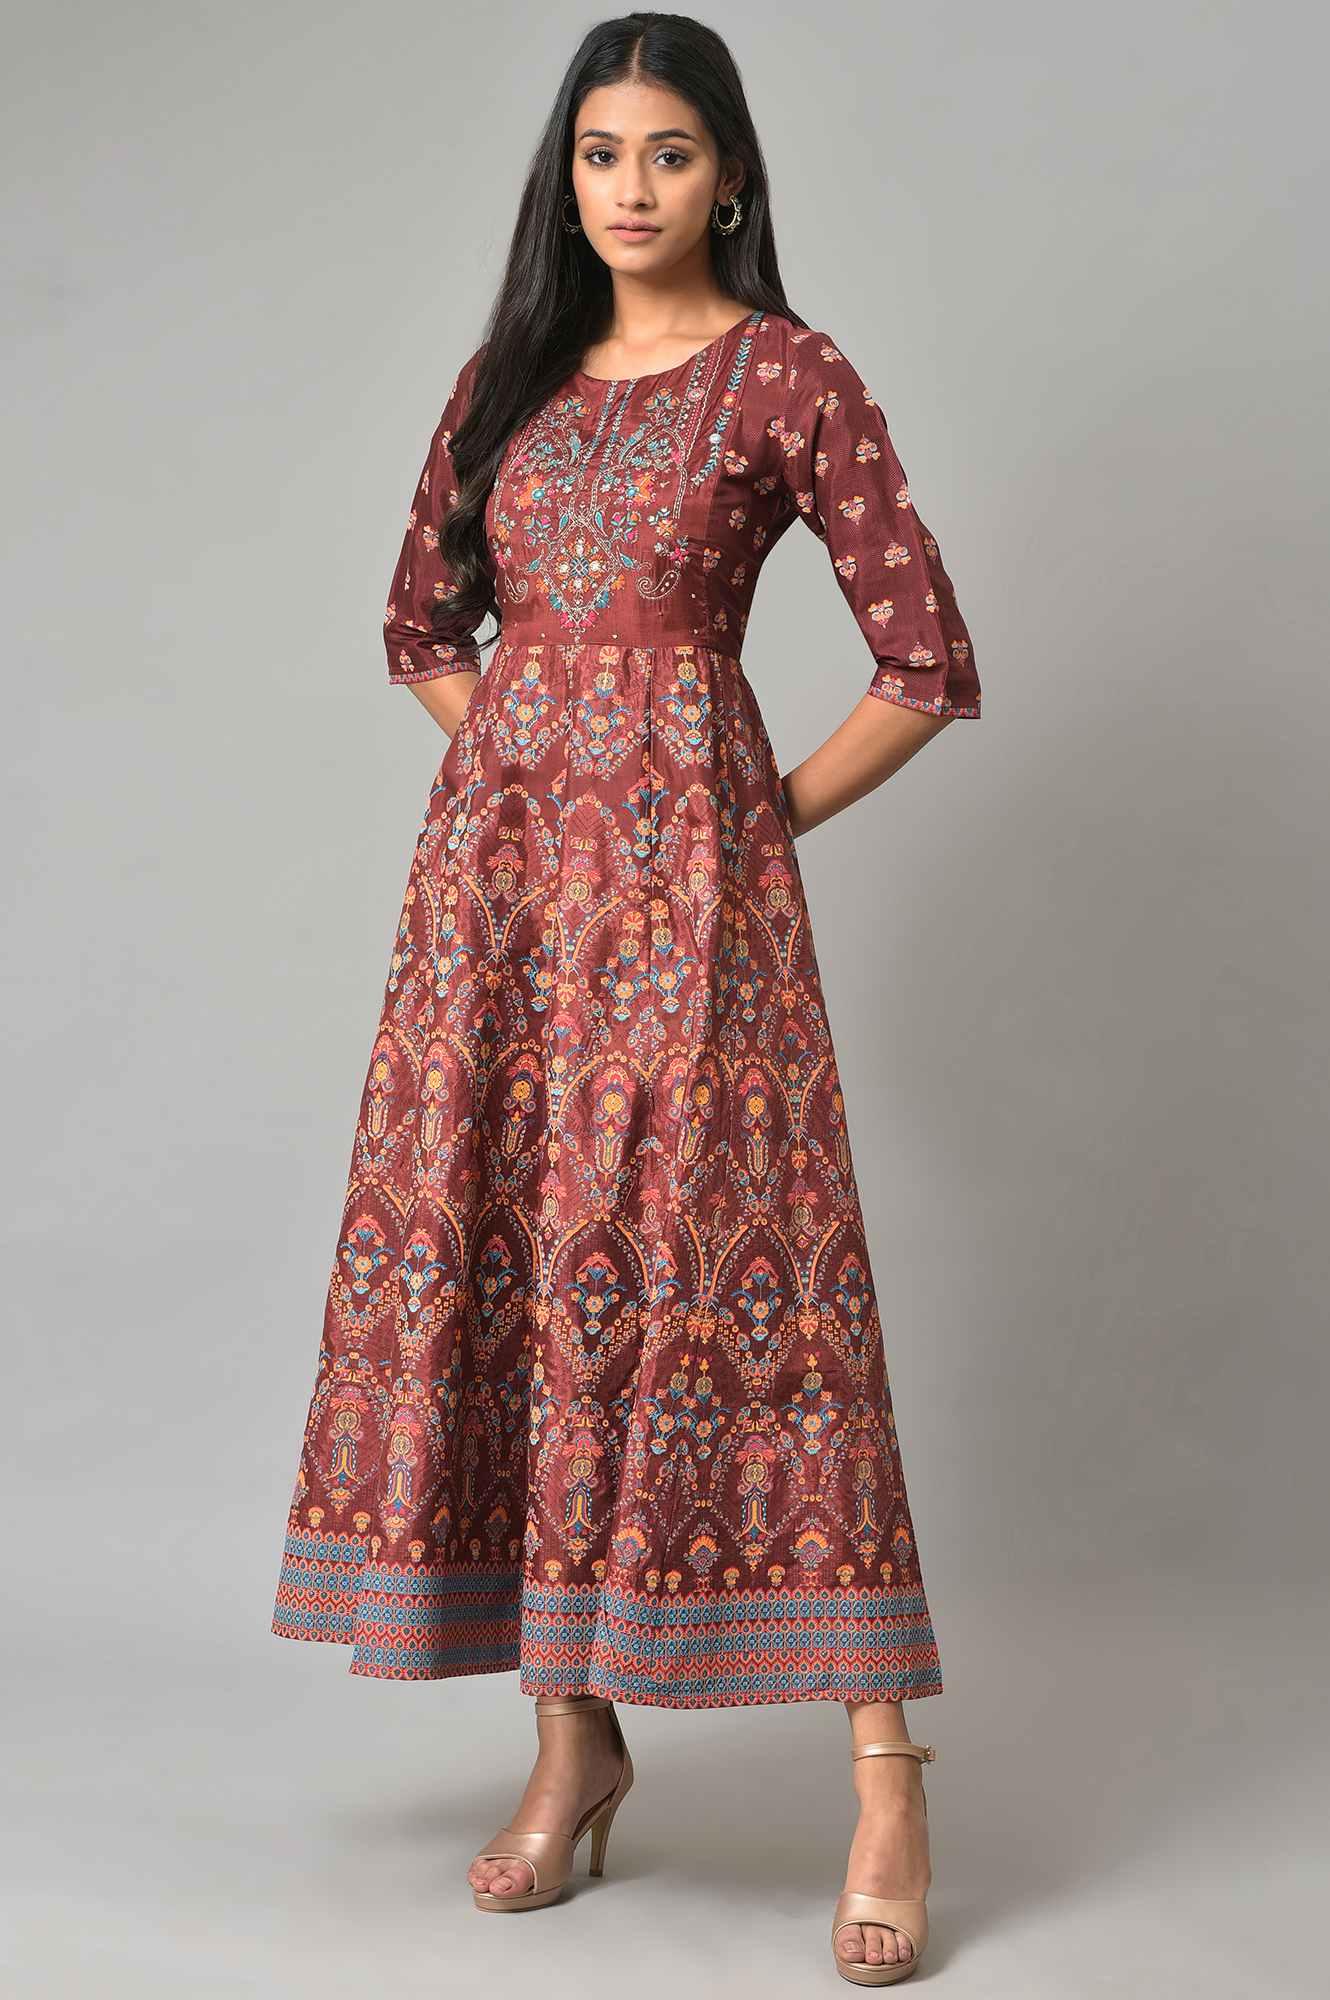 Brown Printed And Embroidered Panelled Festive Dress - wforwoman